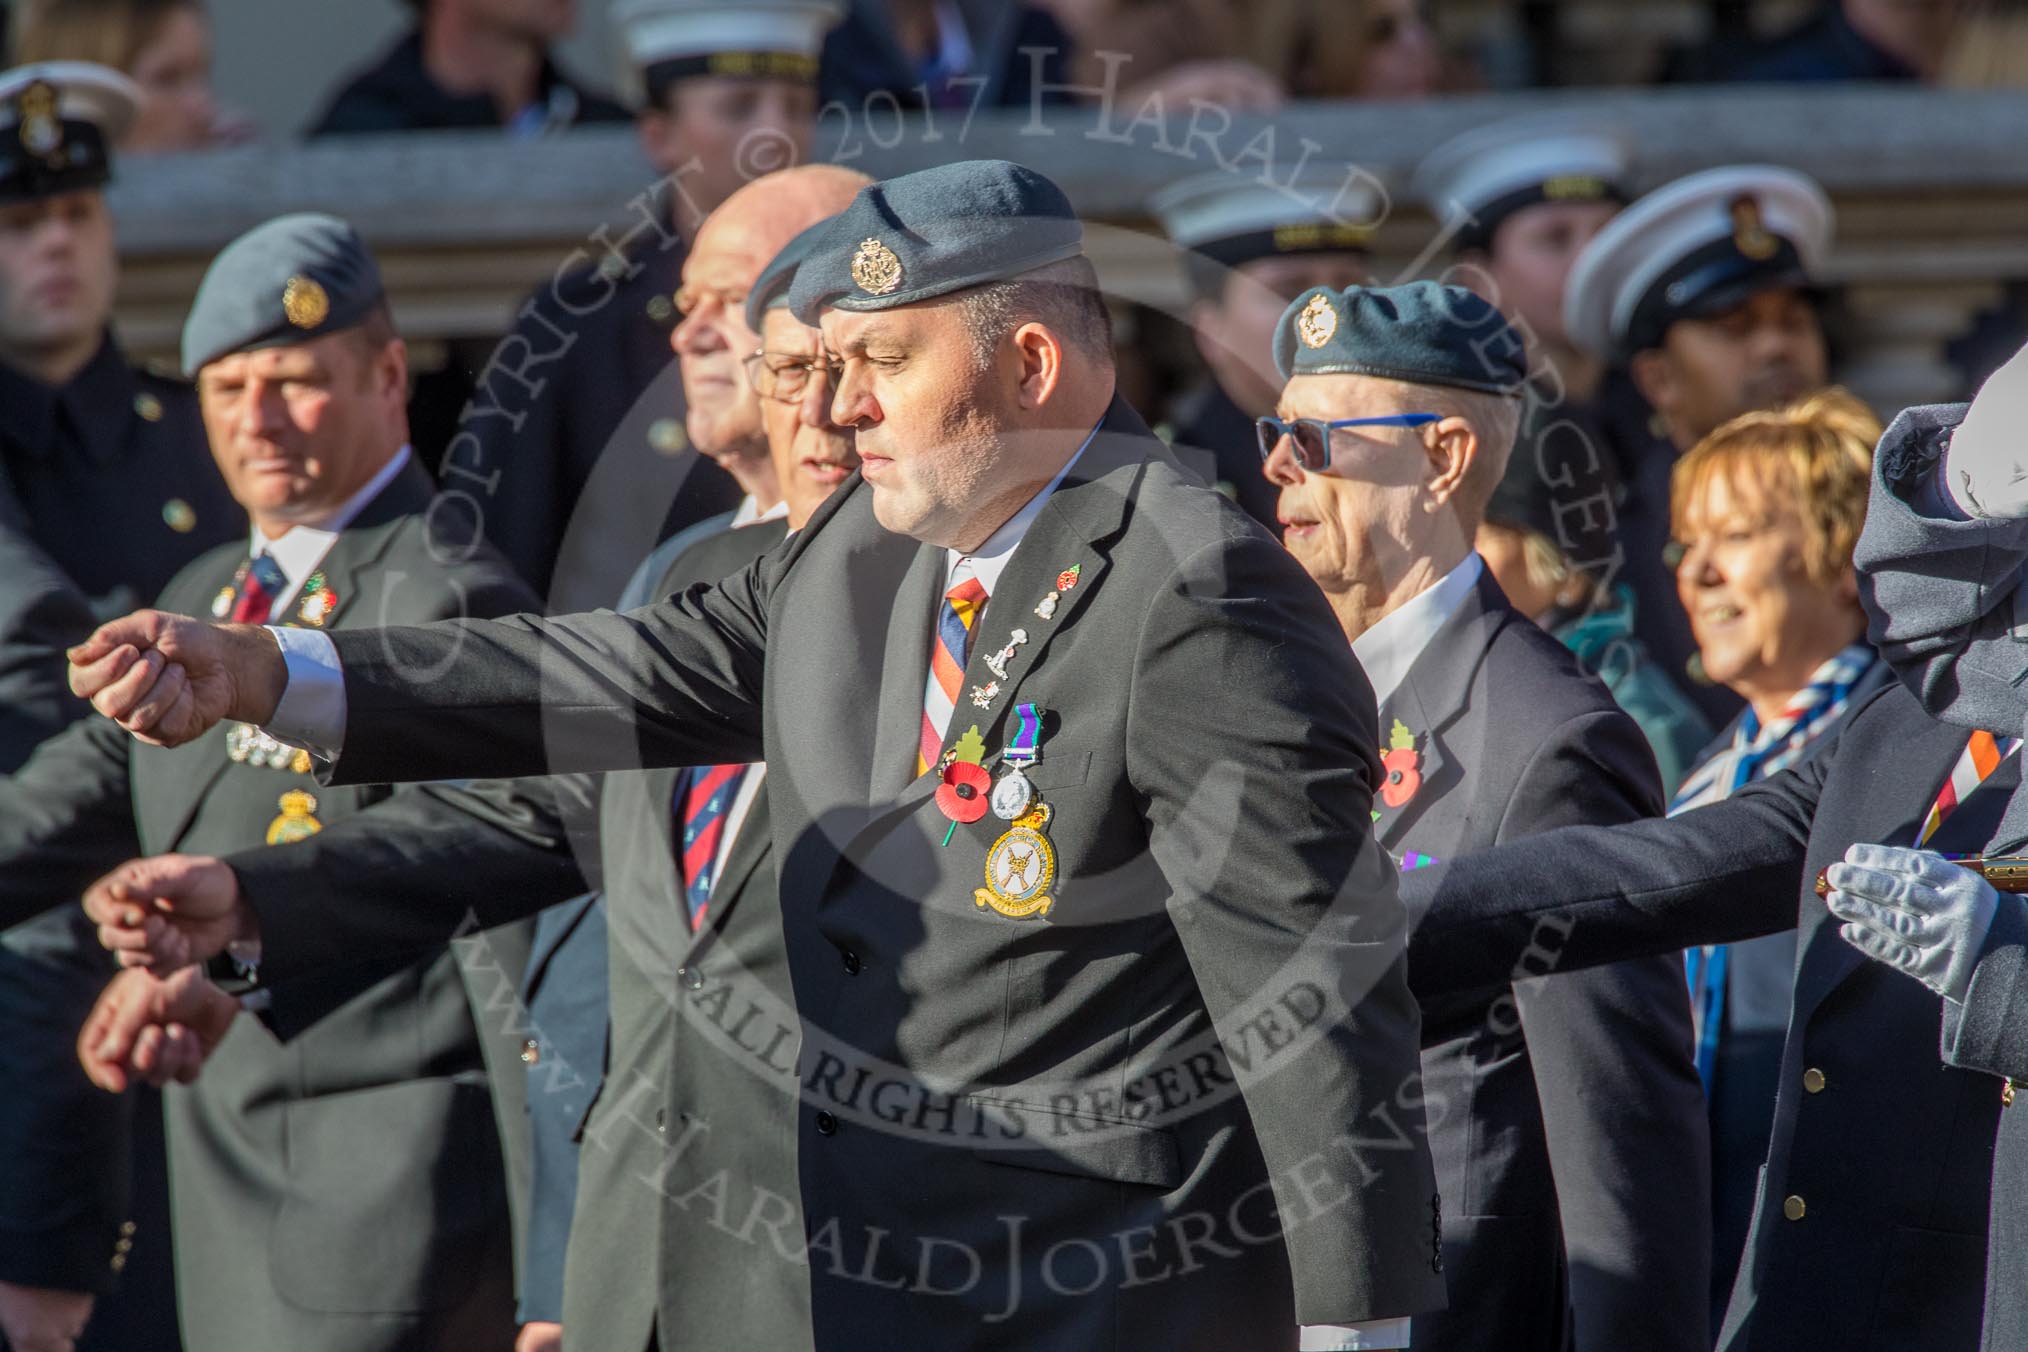 Royal Air Force Regiment Association (Group C3, 175 members) during the Royal British Legion March Past on Remembrance Sunday at the Cenotaph, Whitehall, Westminster, London, 11 November 2018, 12:15.